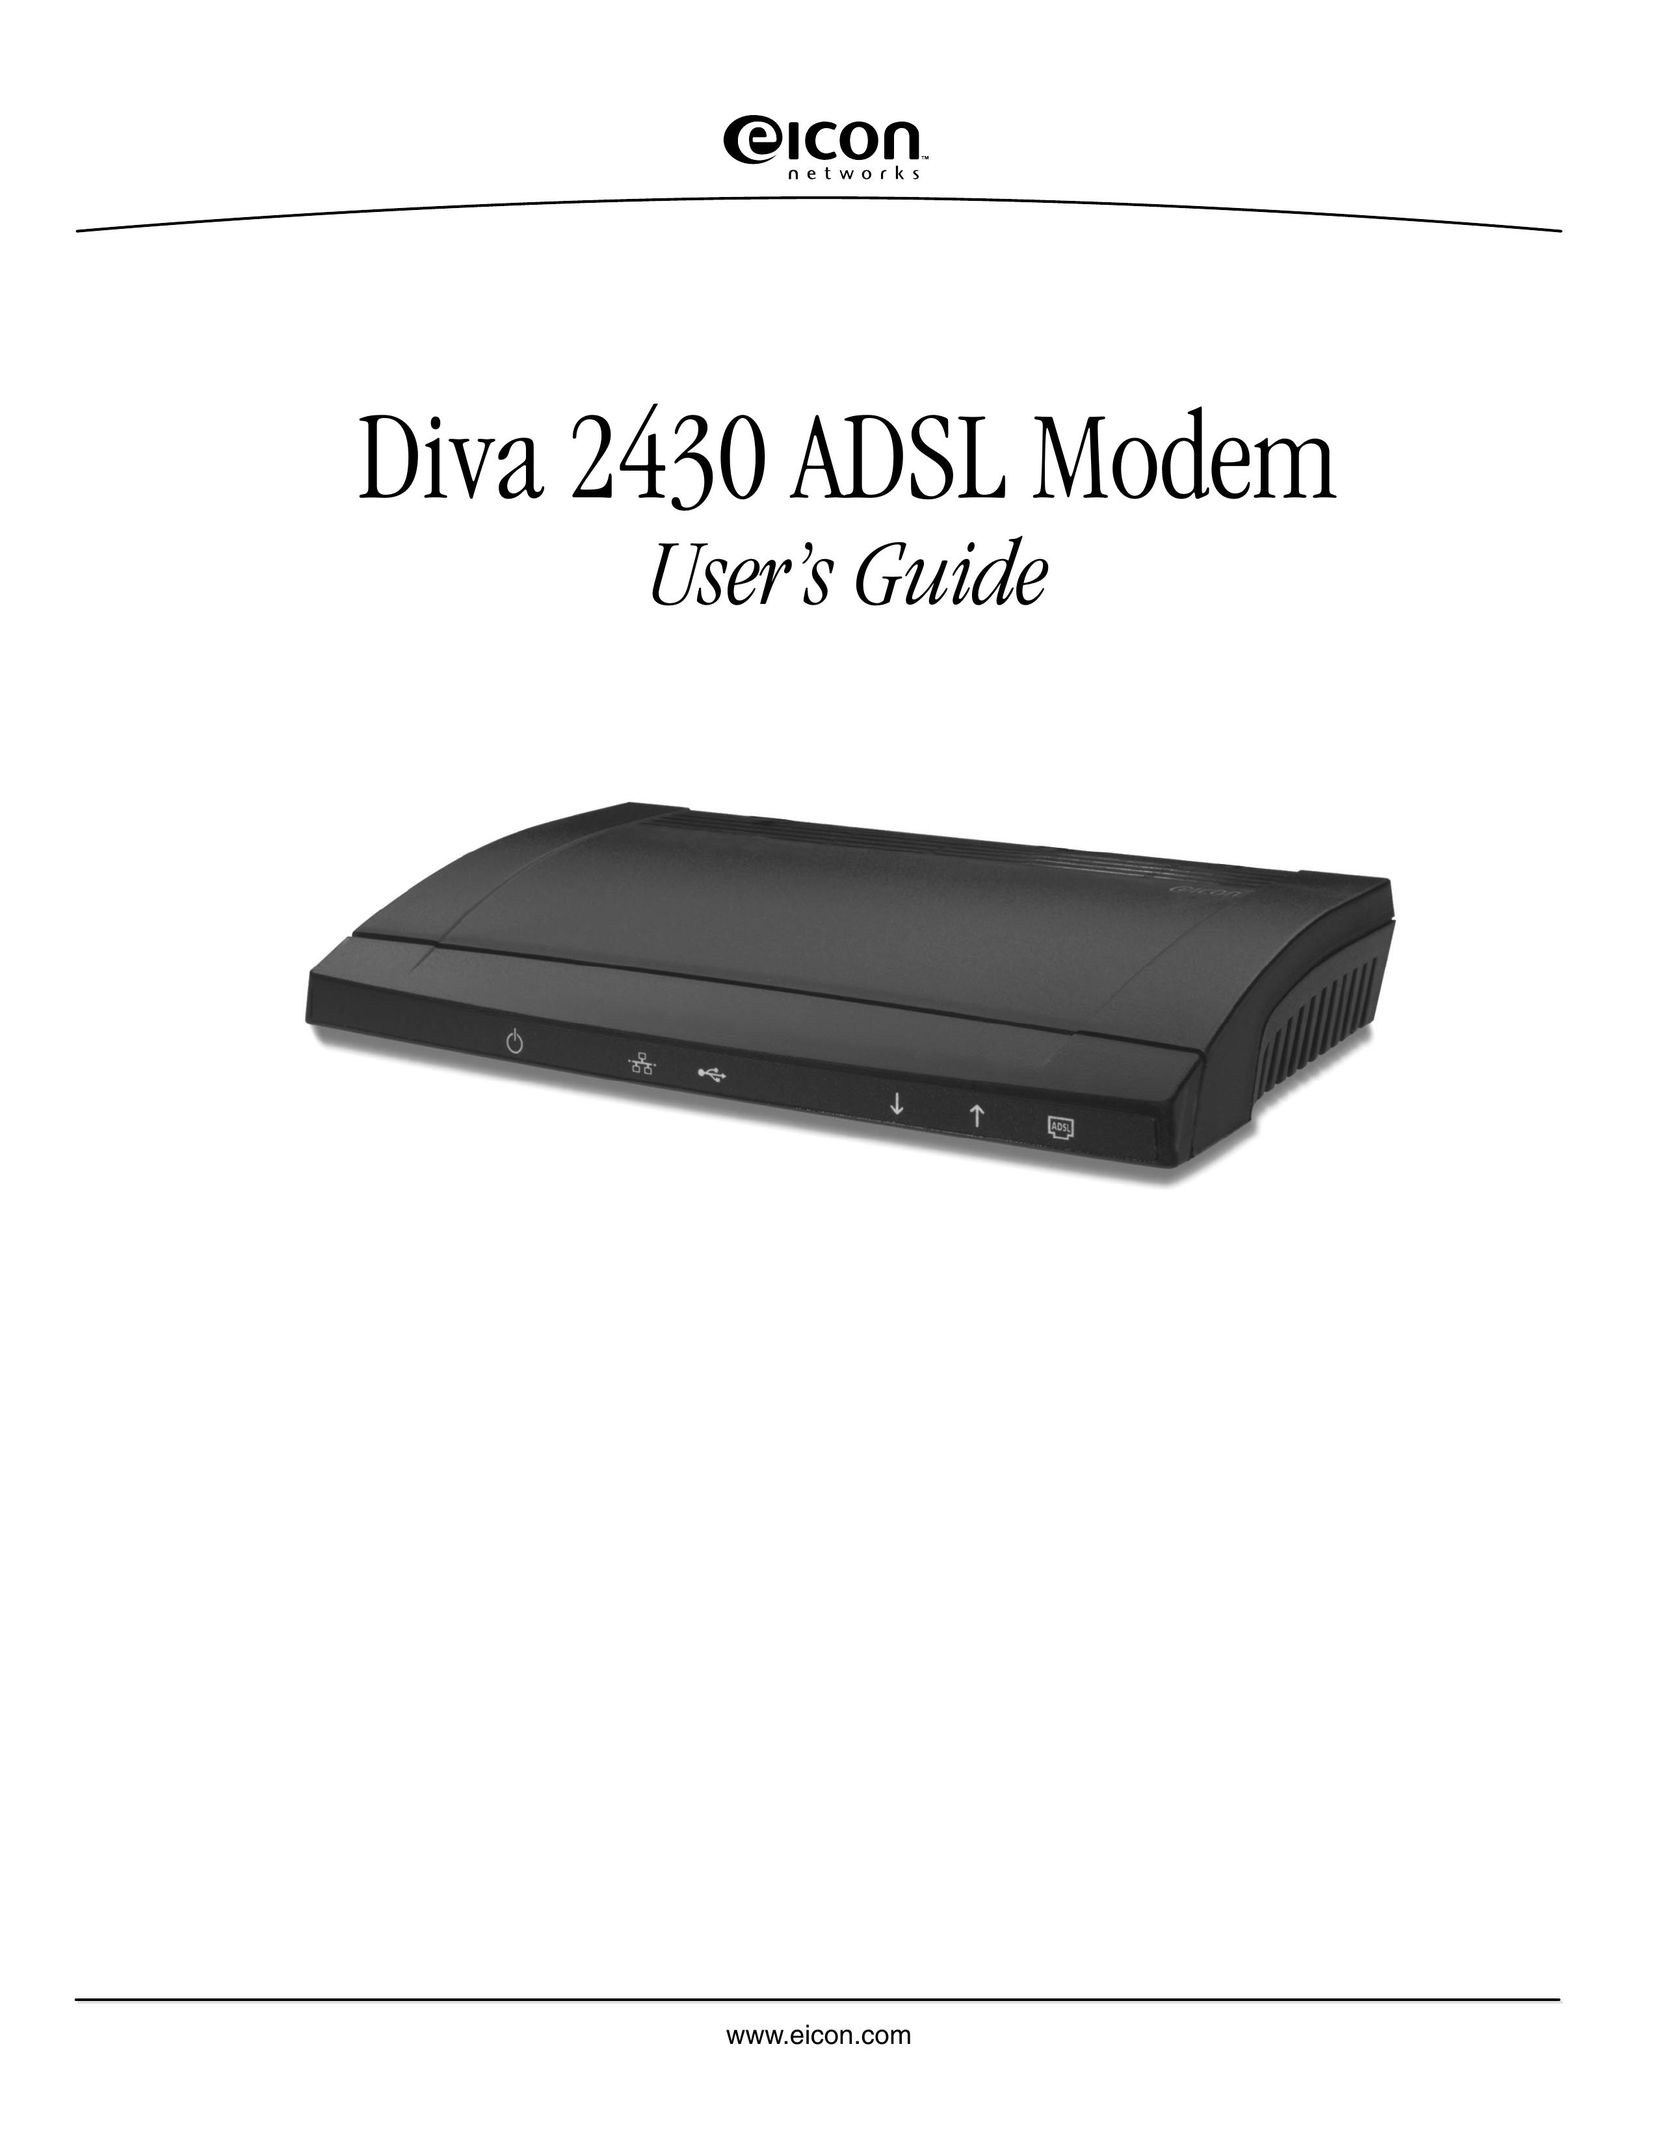 Eicon Networks Diva 2430 Network Card User Manual